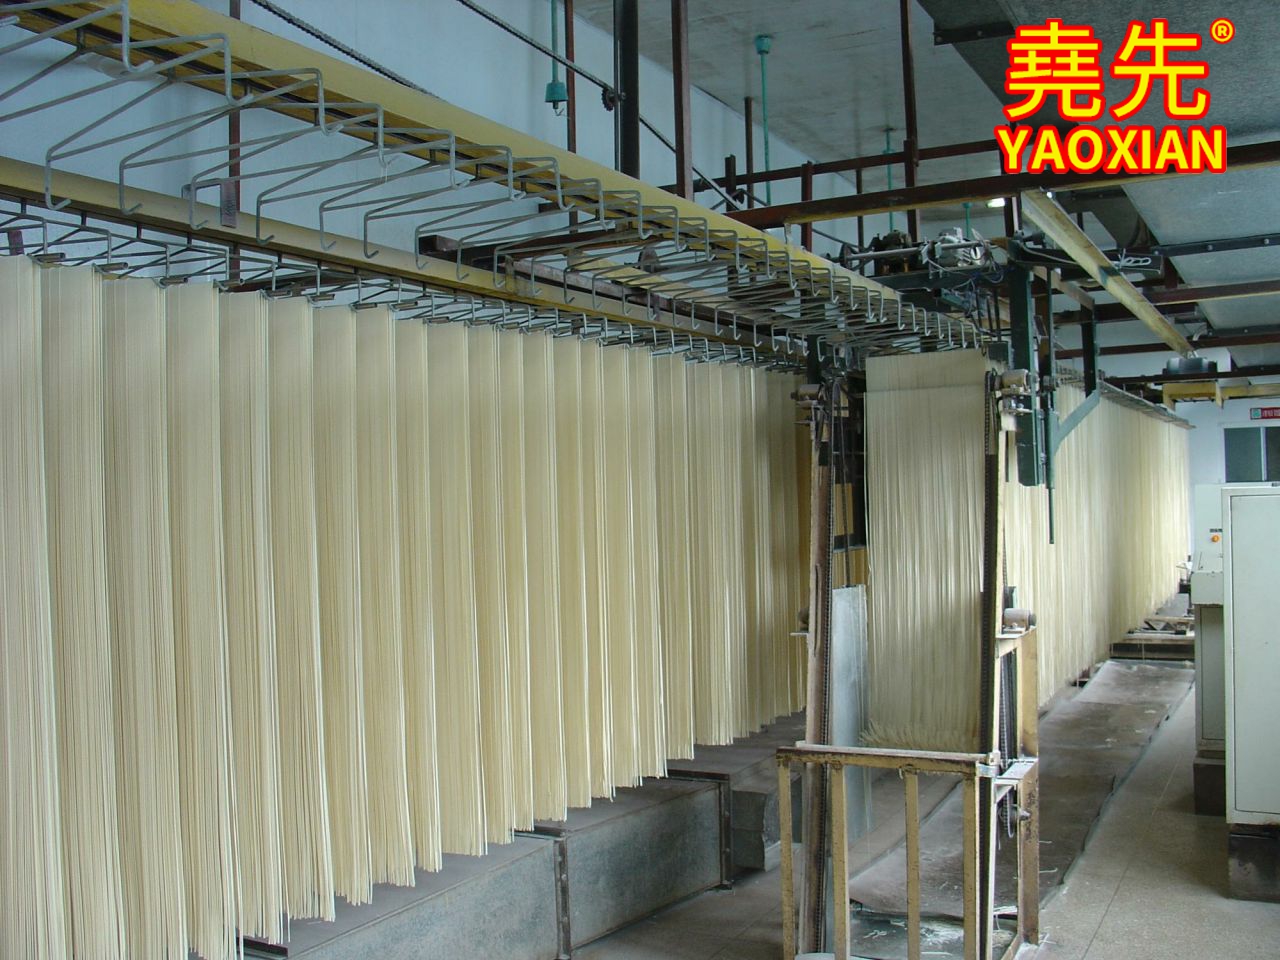 Briefly describe the practice of Guilin rice noodles